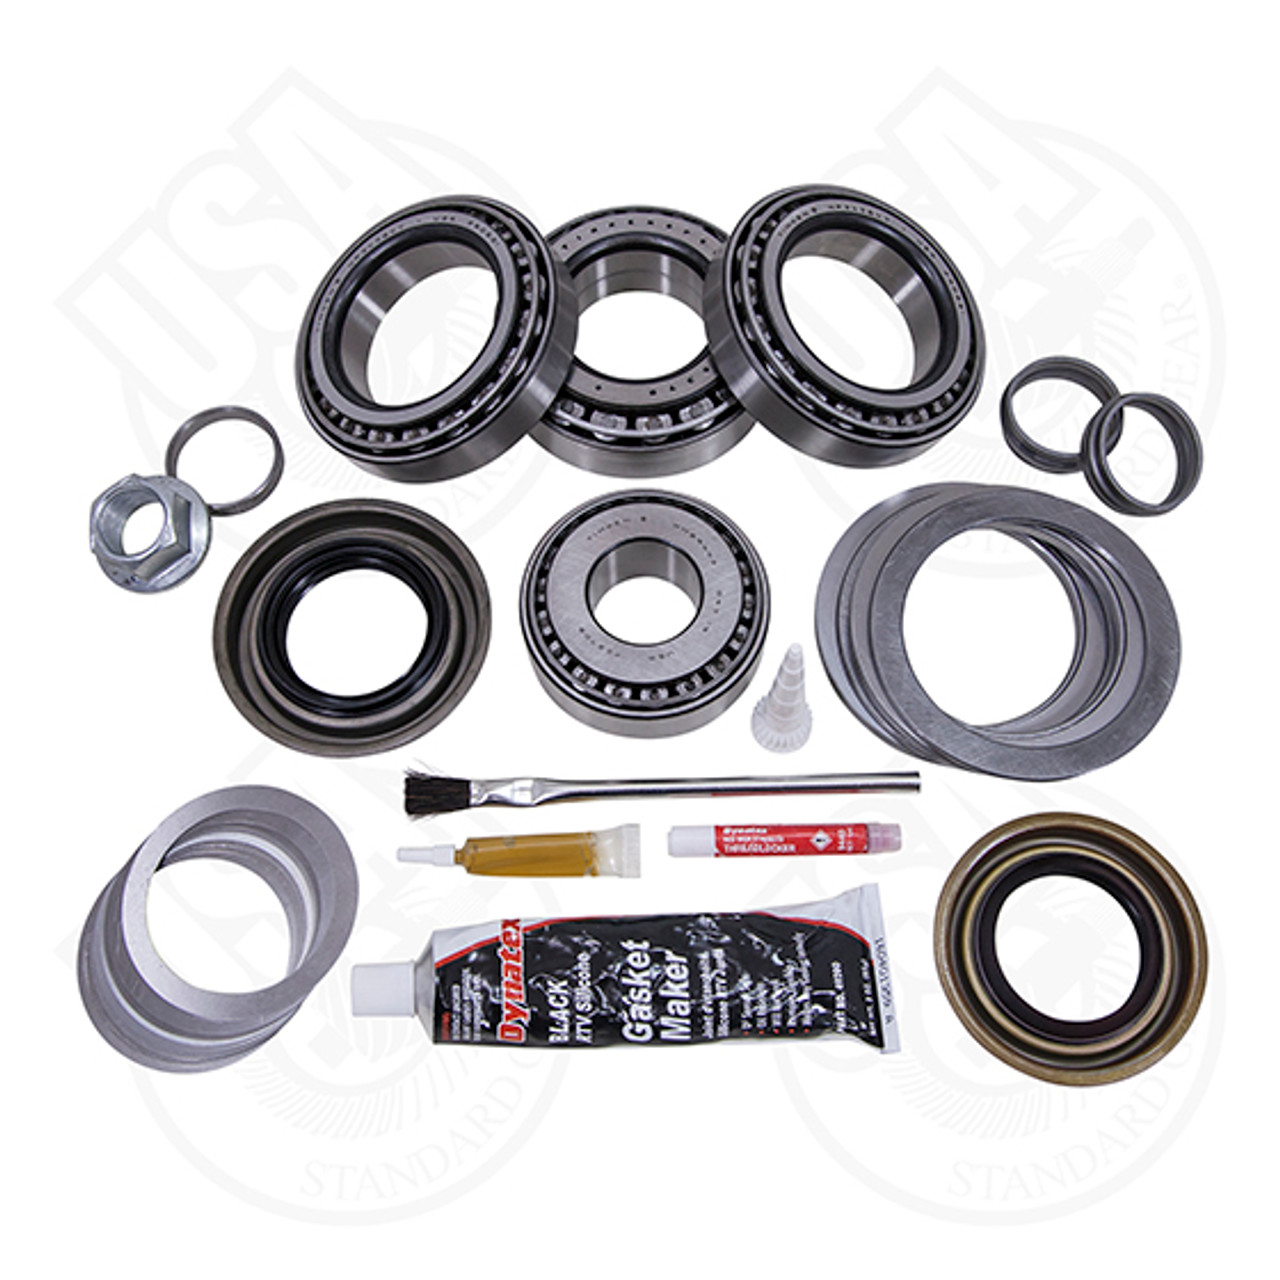 USA Standard Master Overhaul kit for '08-'10 Ford 9.75" differential.